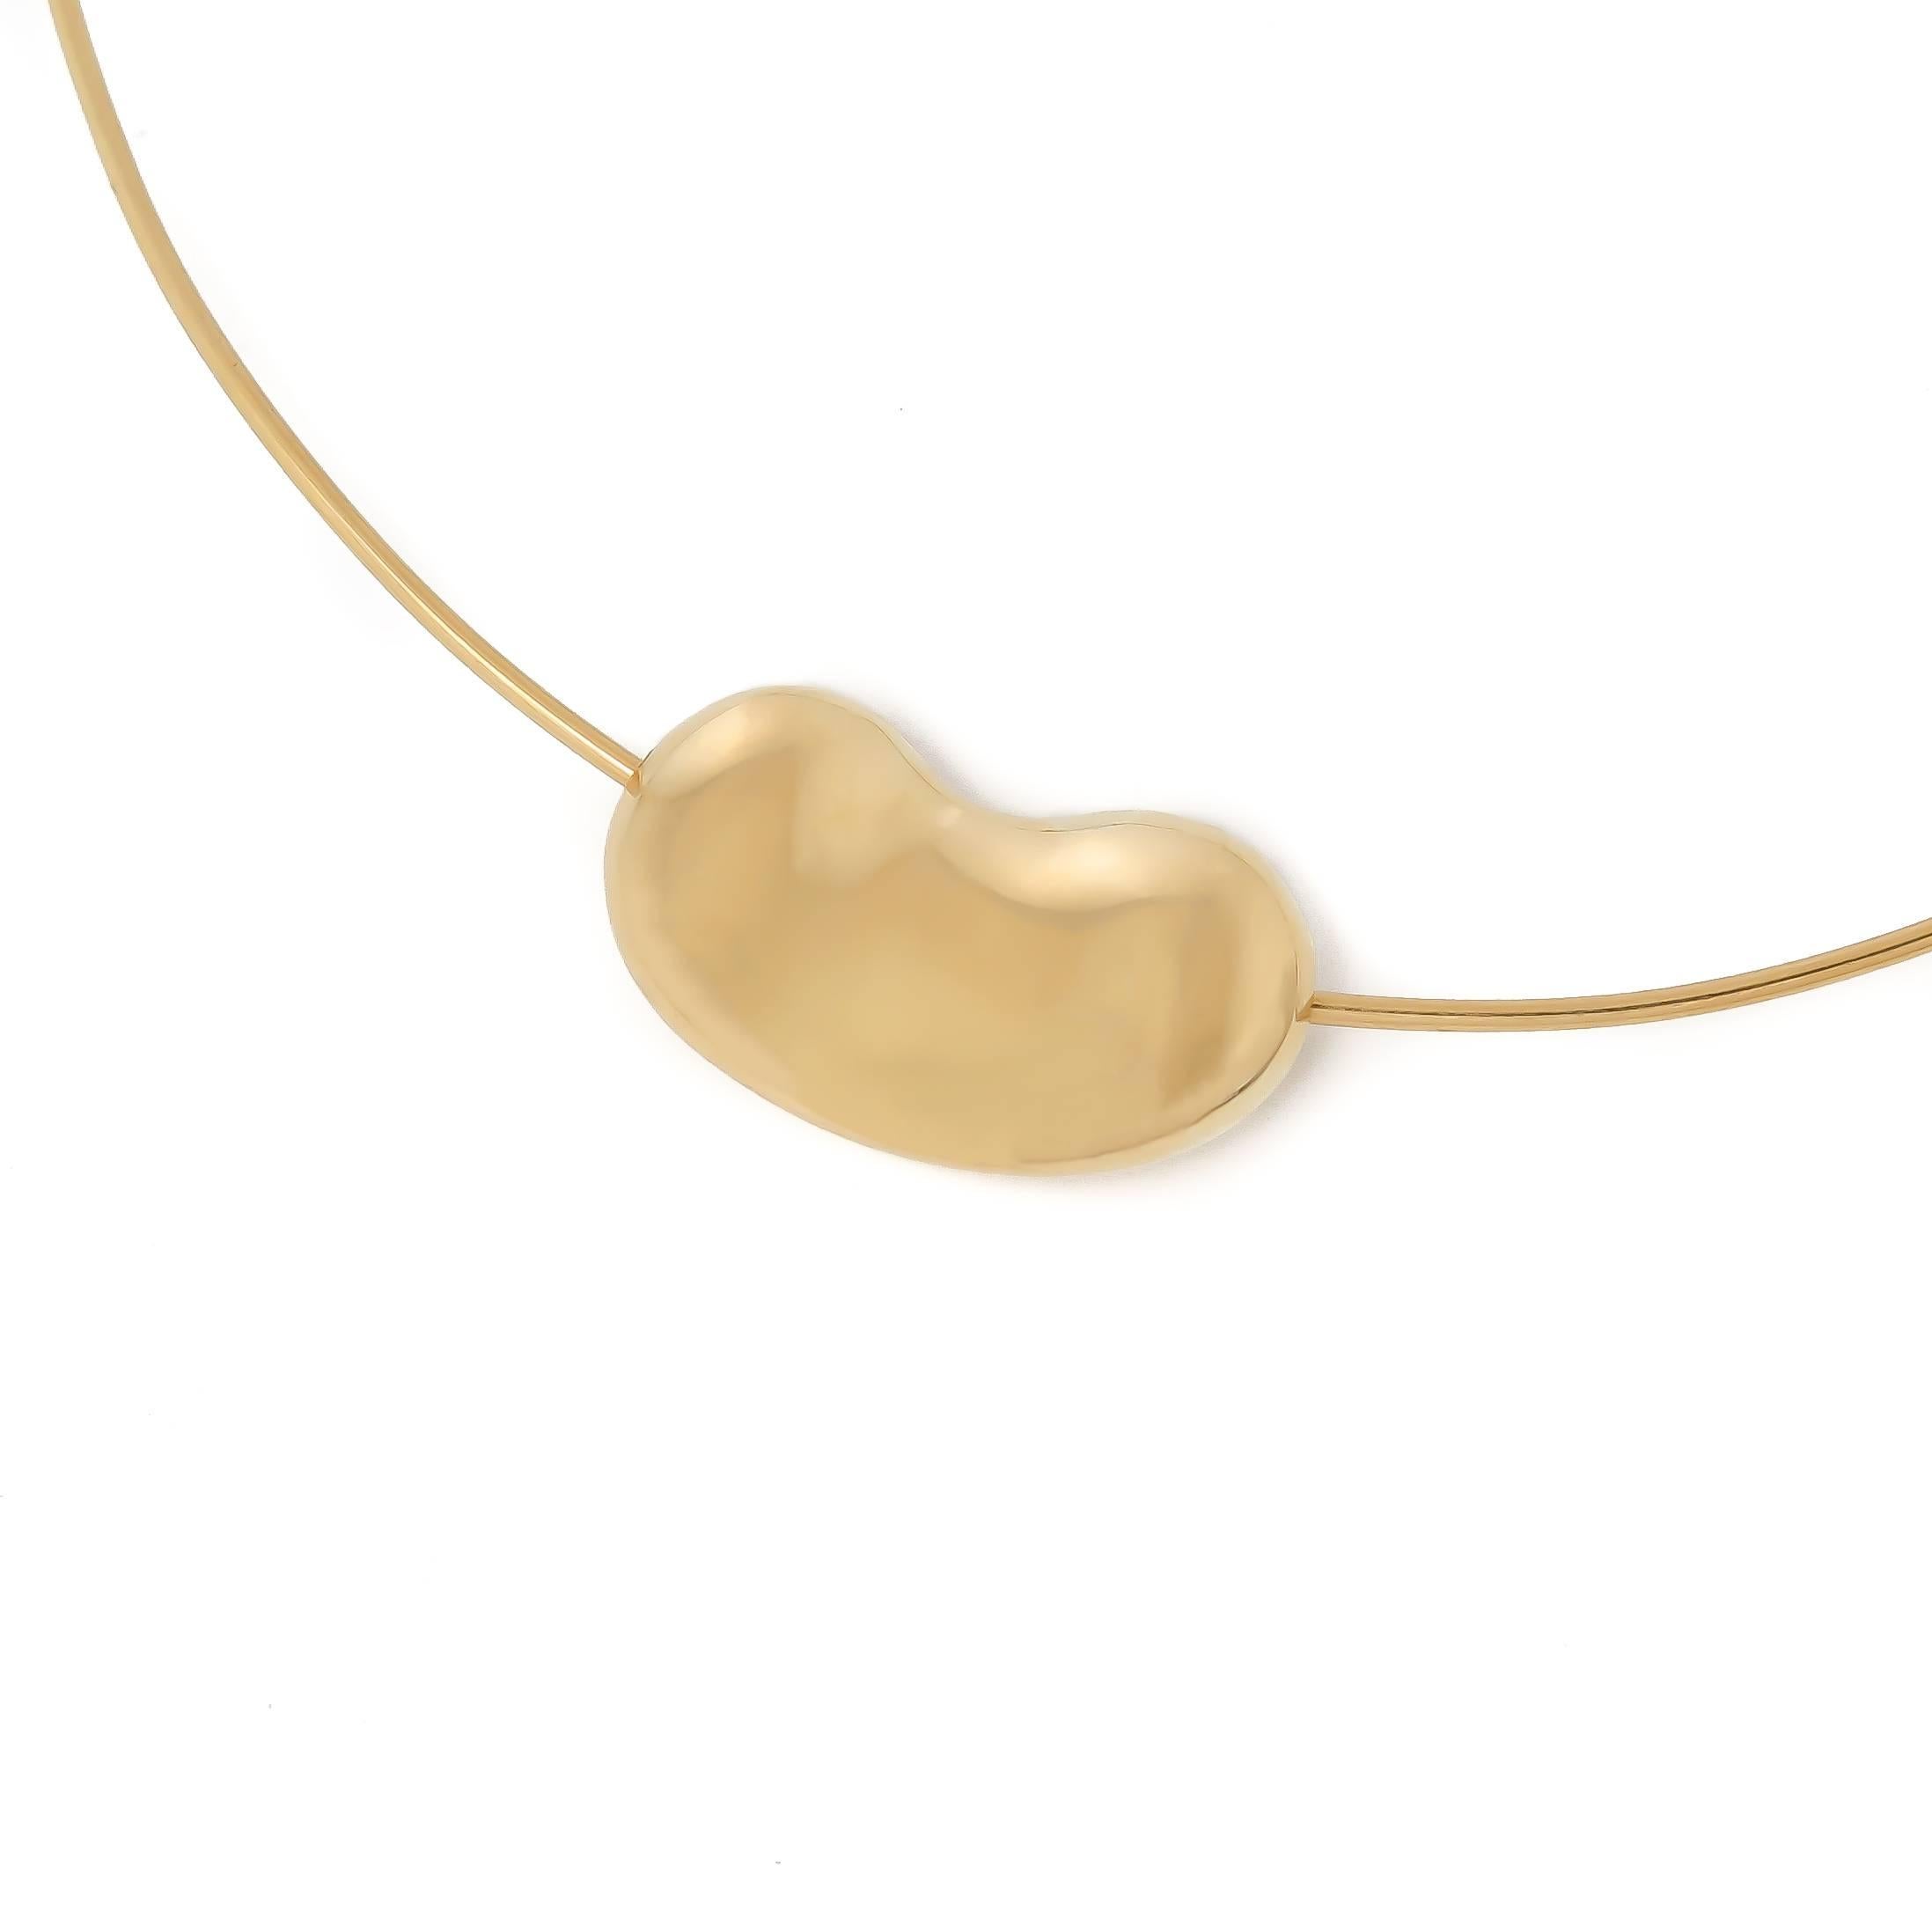 Circa 1980 Elsa Peretti for Tiffany & Company 18K yellow Gold Bean Necklace, measuring 1 1/8 X 5/8 inch and suspended from a Torque Wire measuring 16 inch. The bean floats freely on the wire for movement. 